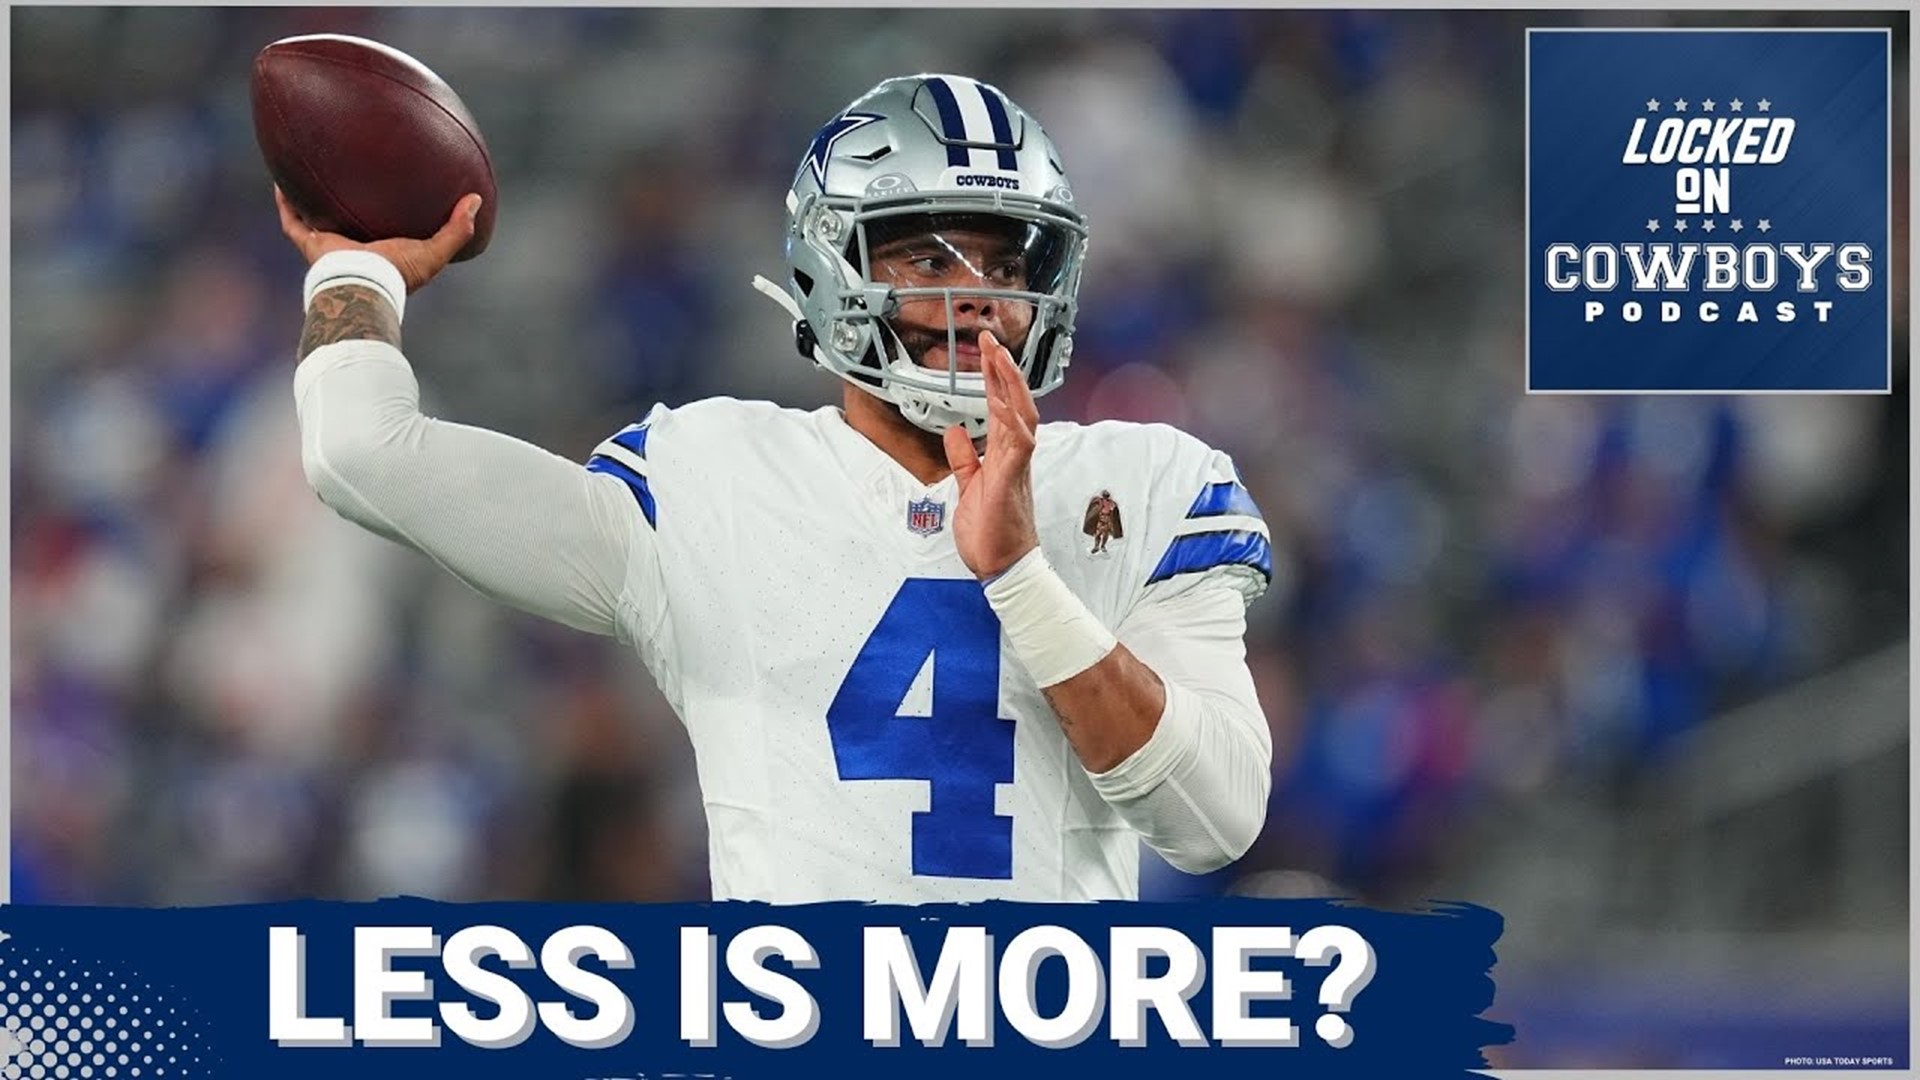 The Dallas Cowboys are asking less of QB Dak Prescott before the snap. What are the benefits to having the offensive line call out protections.